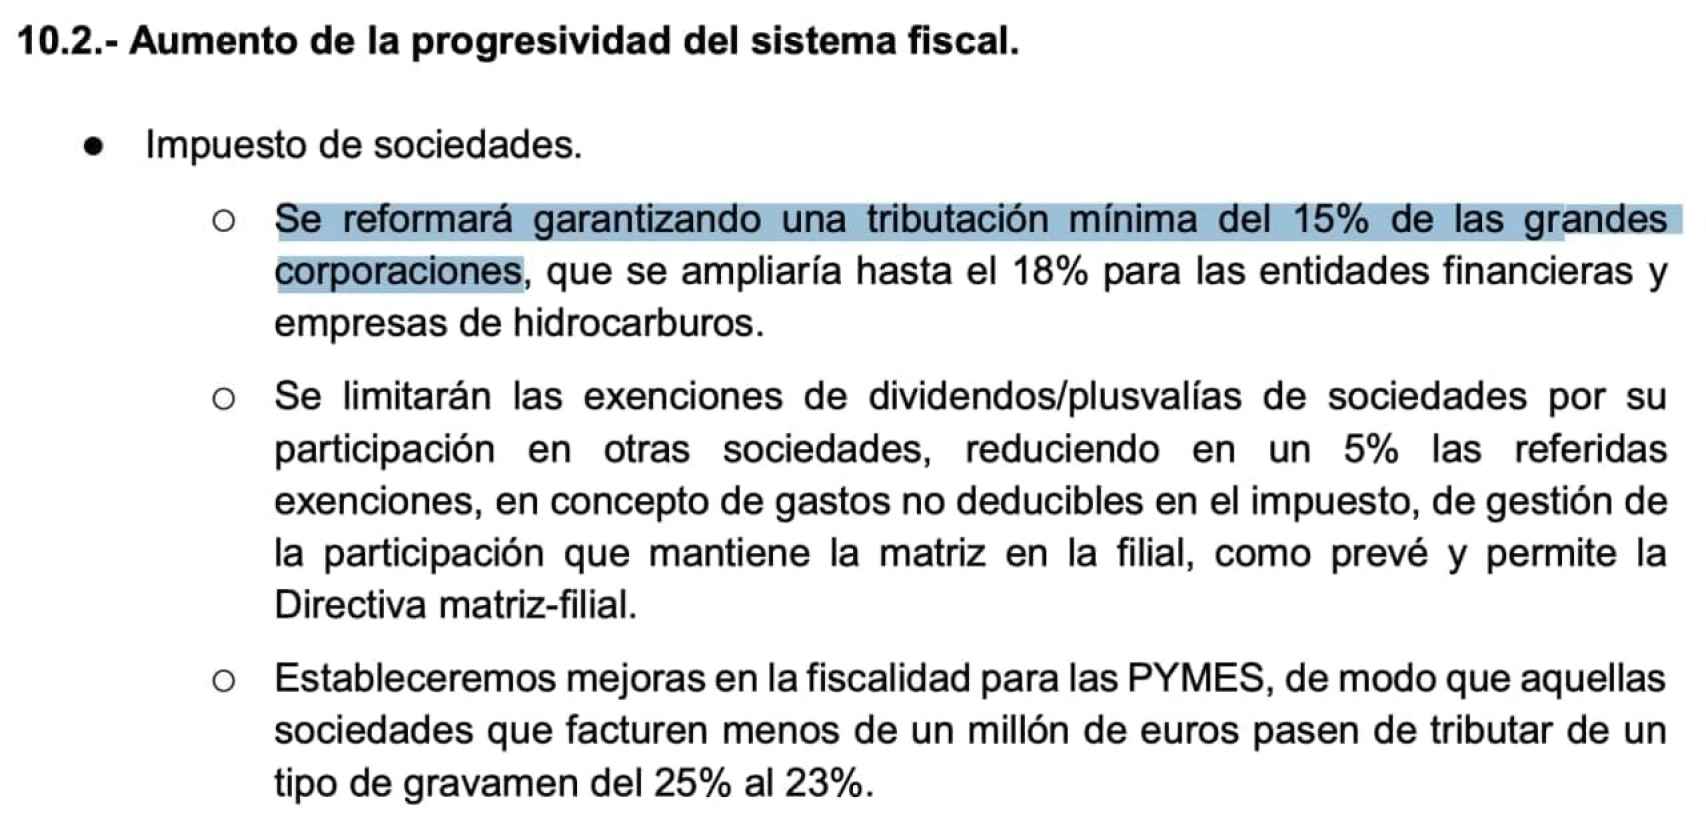 Extract from the fiscal chapter in the coalition program between PSOE and United We Can.